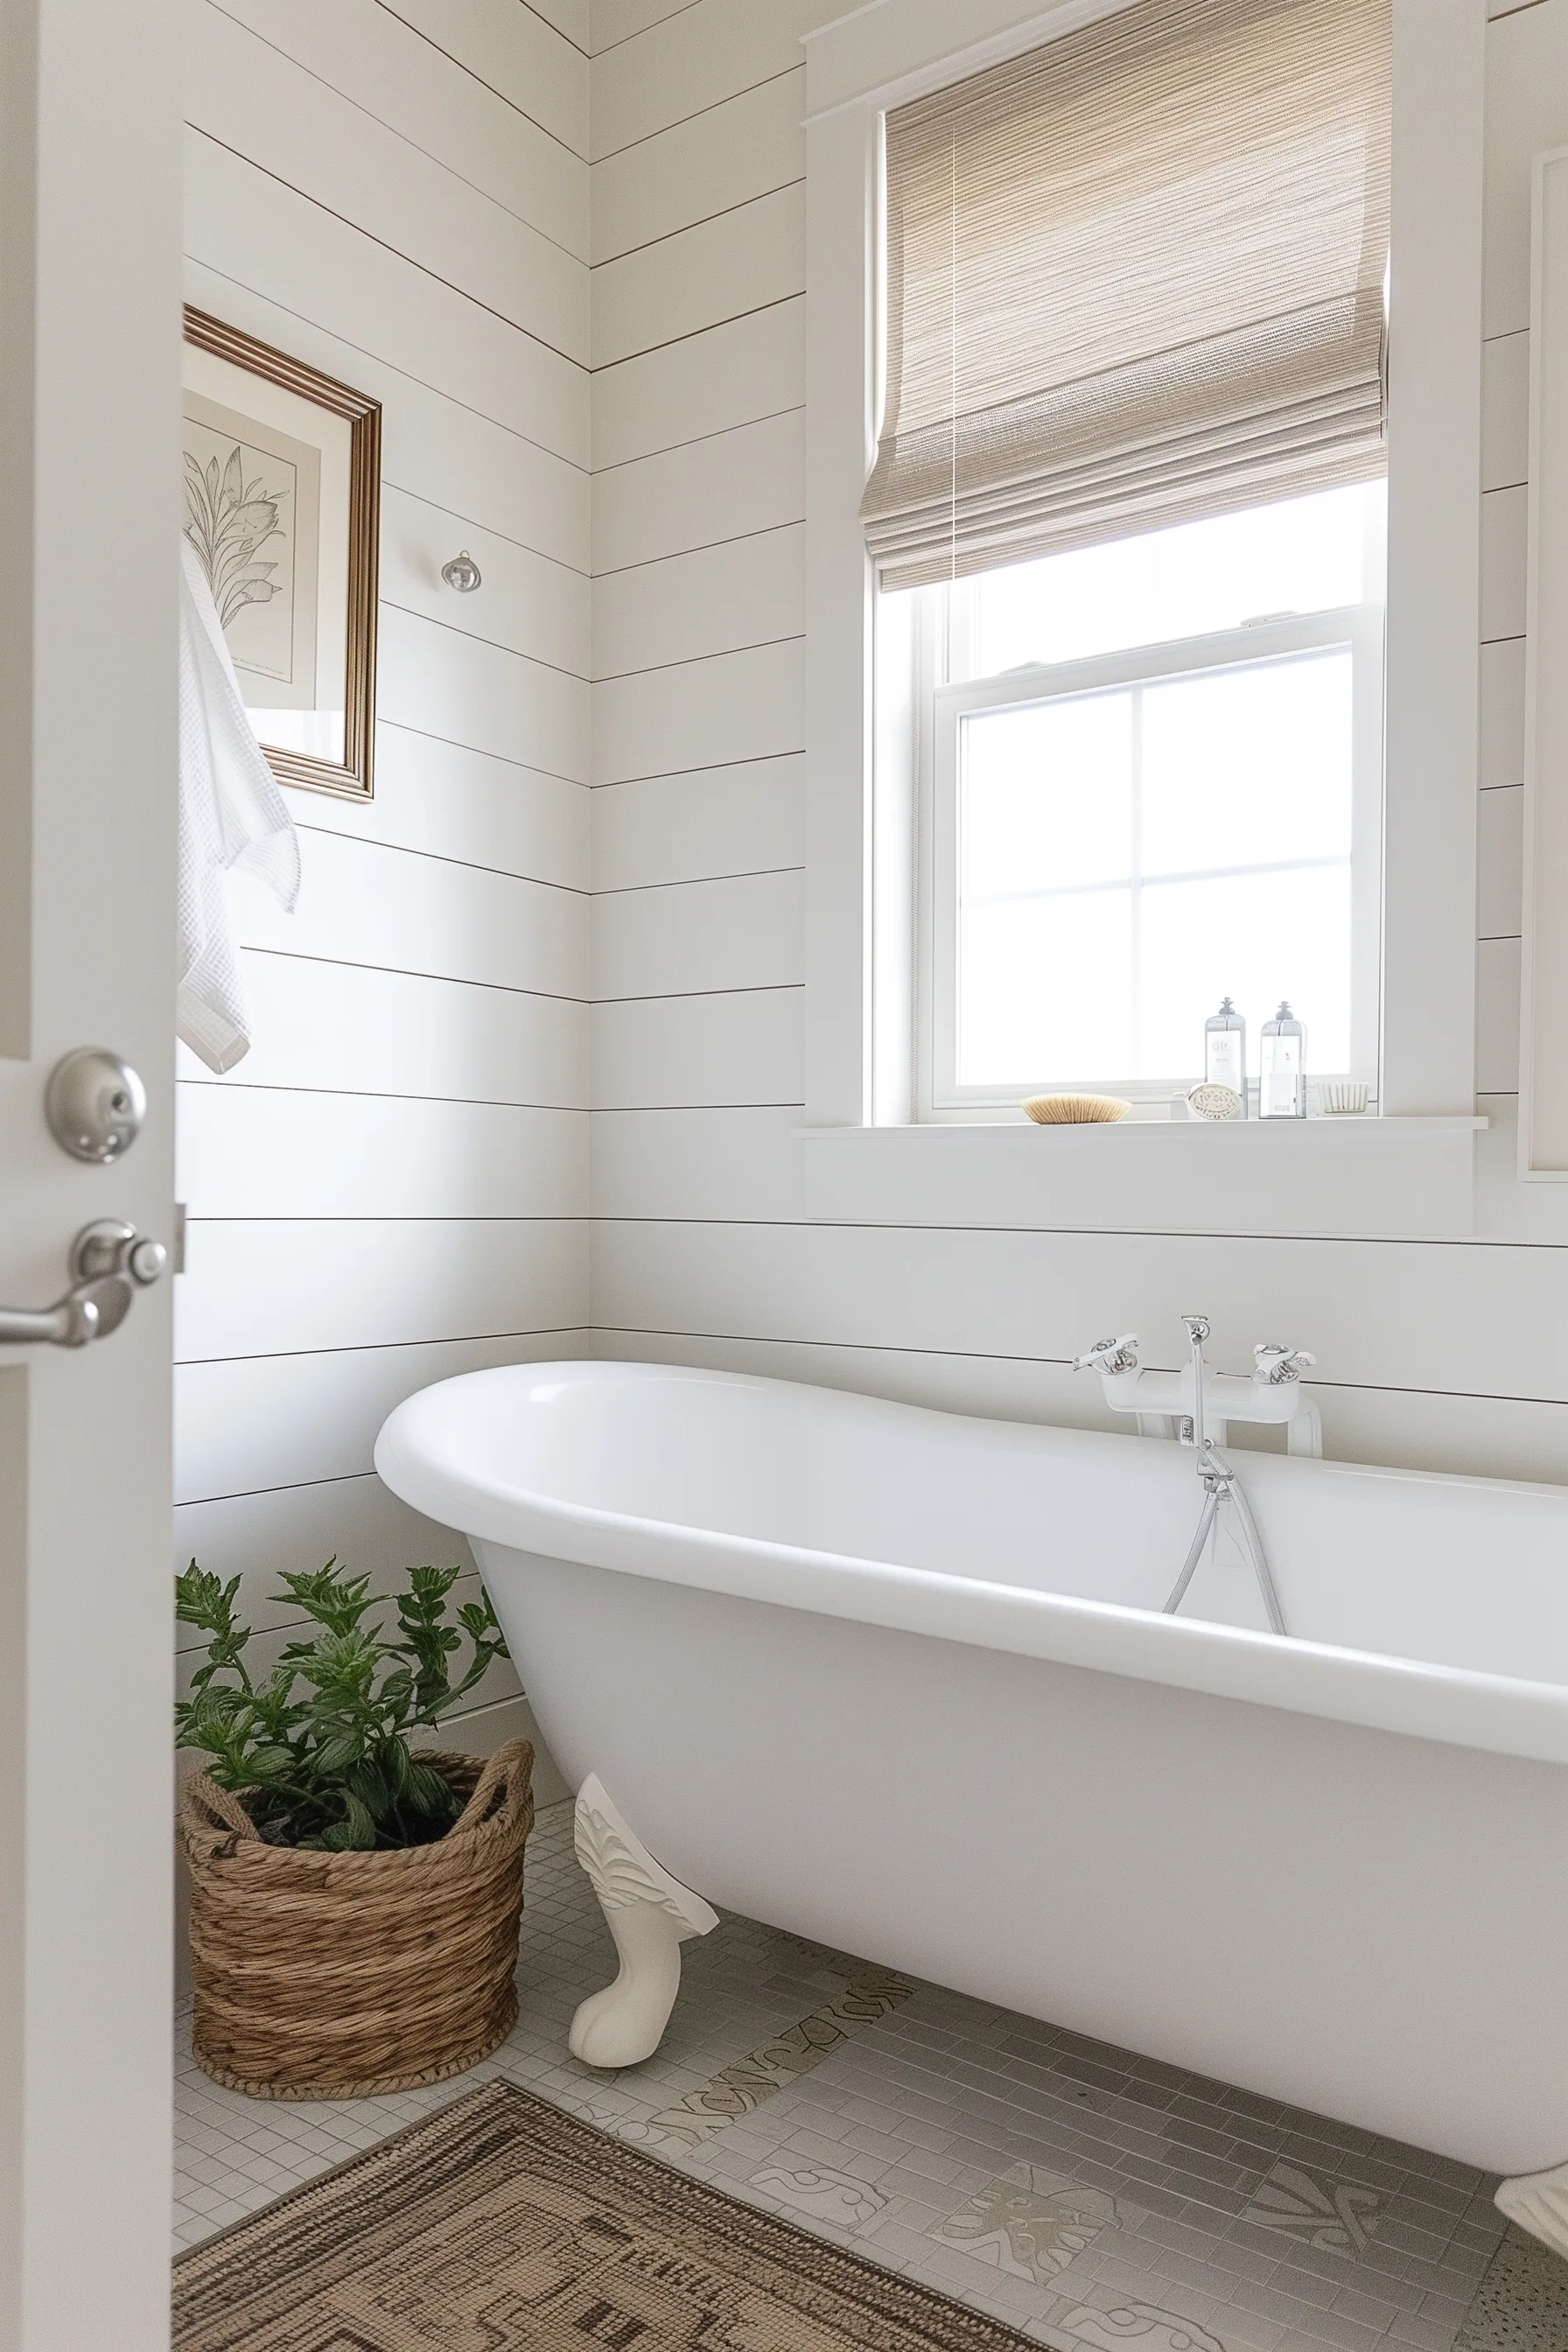 A white clawfoot tub with tiled ground and shiplap walls